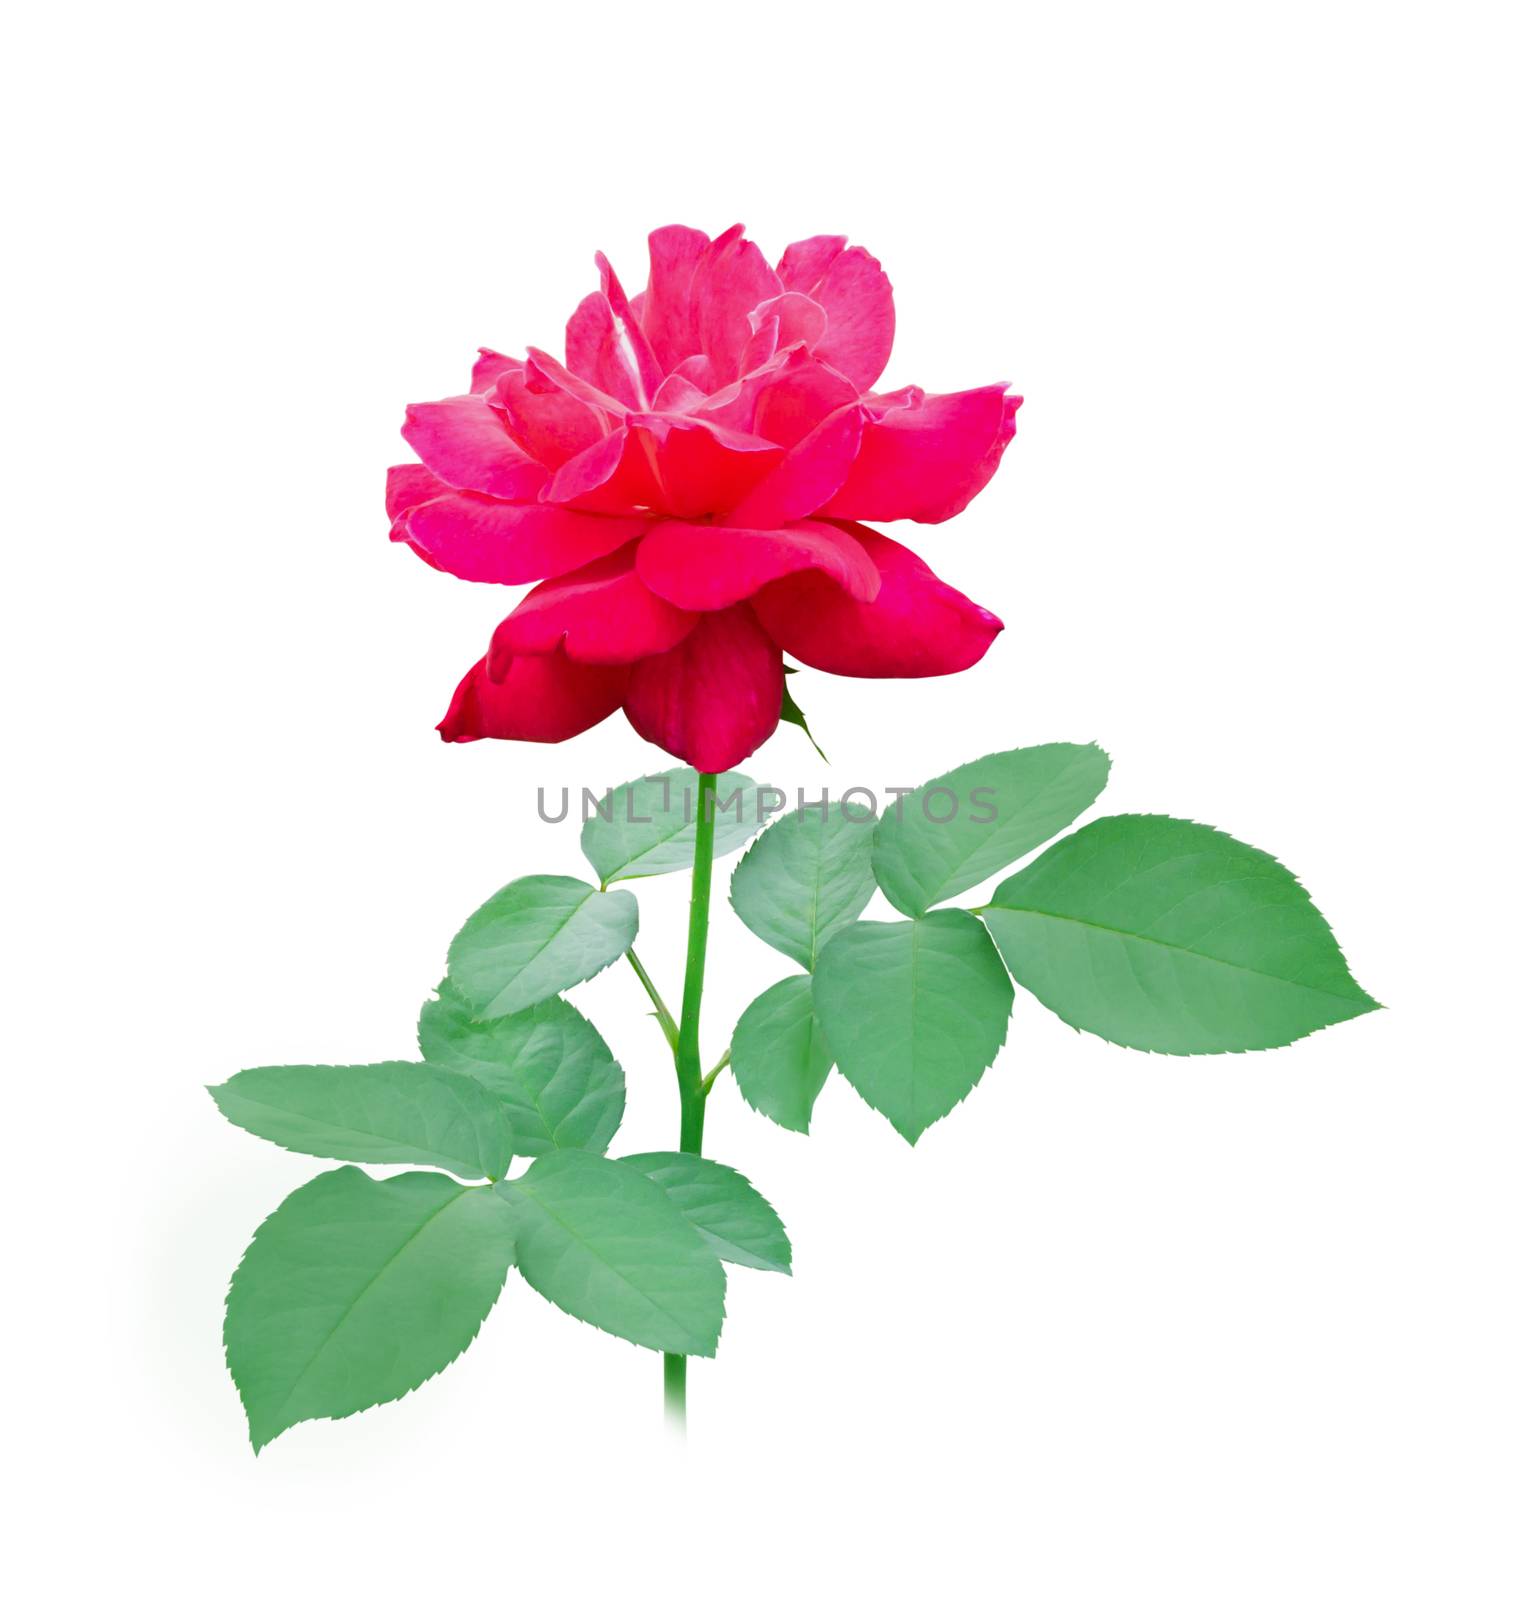 Beautiful red rose flower with leaf isolated on white background by pt.pongsak@gmail.com